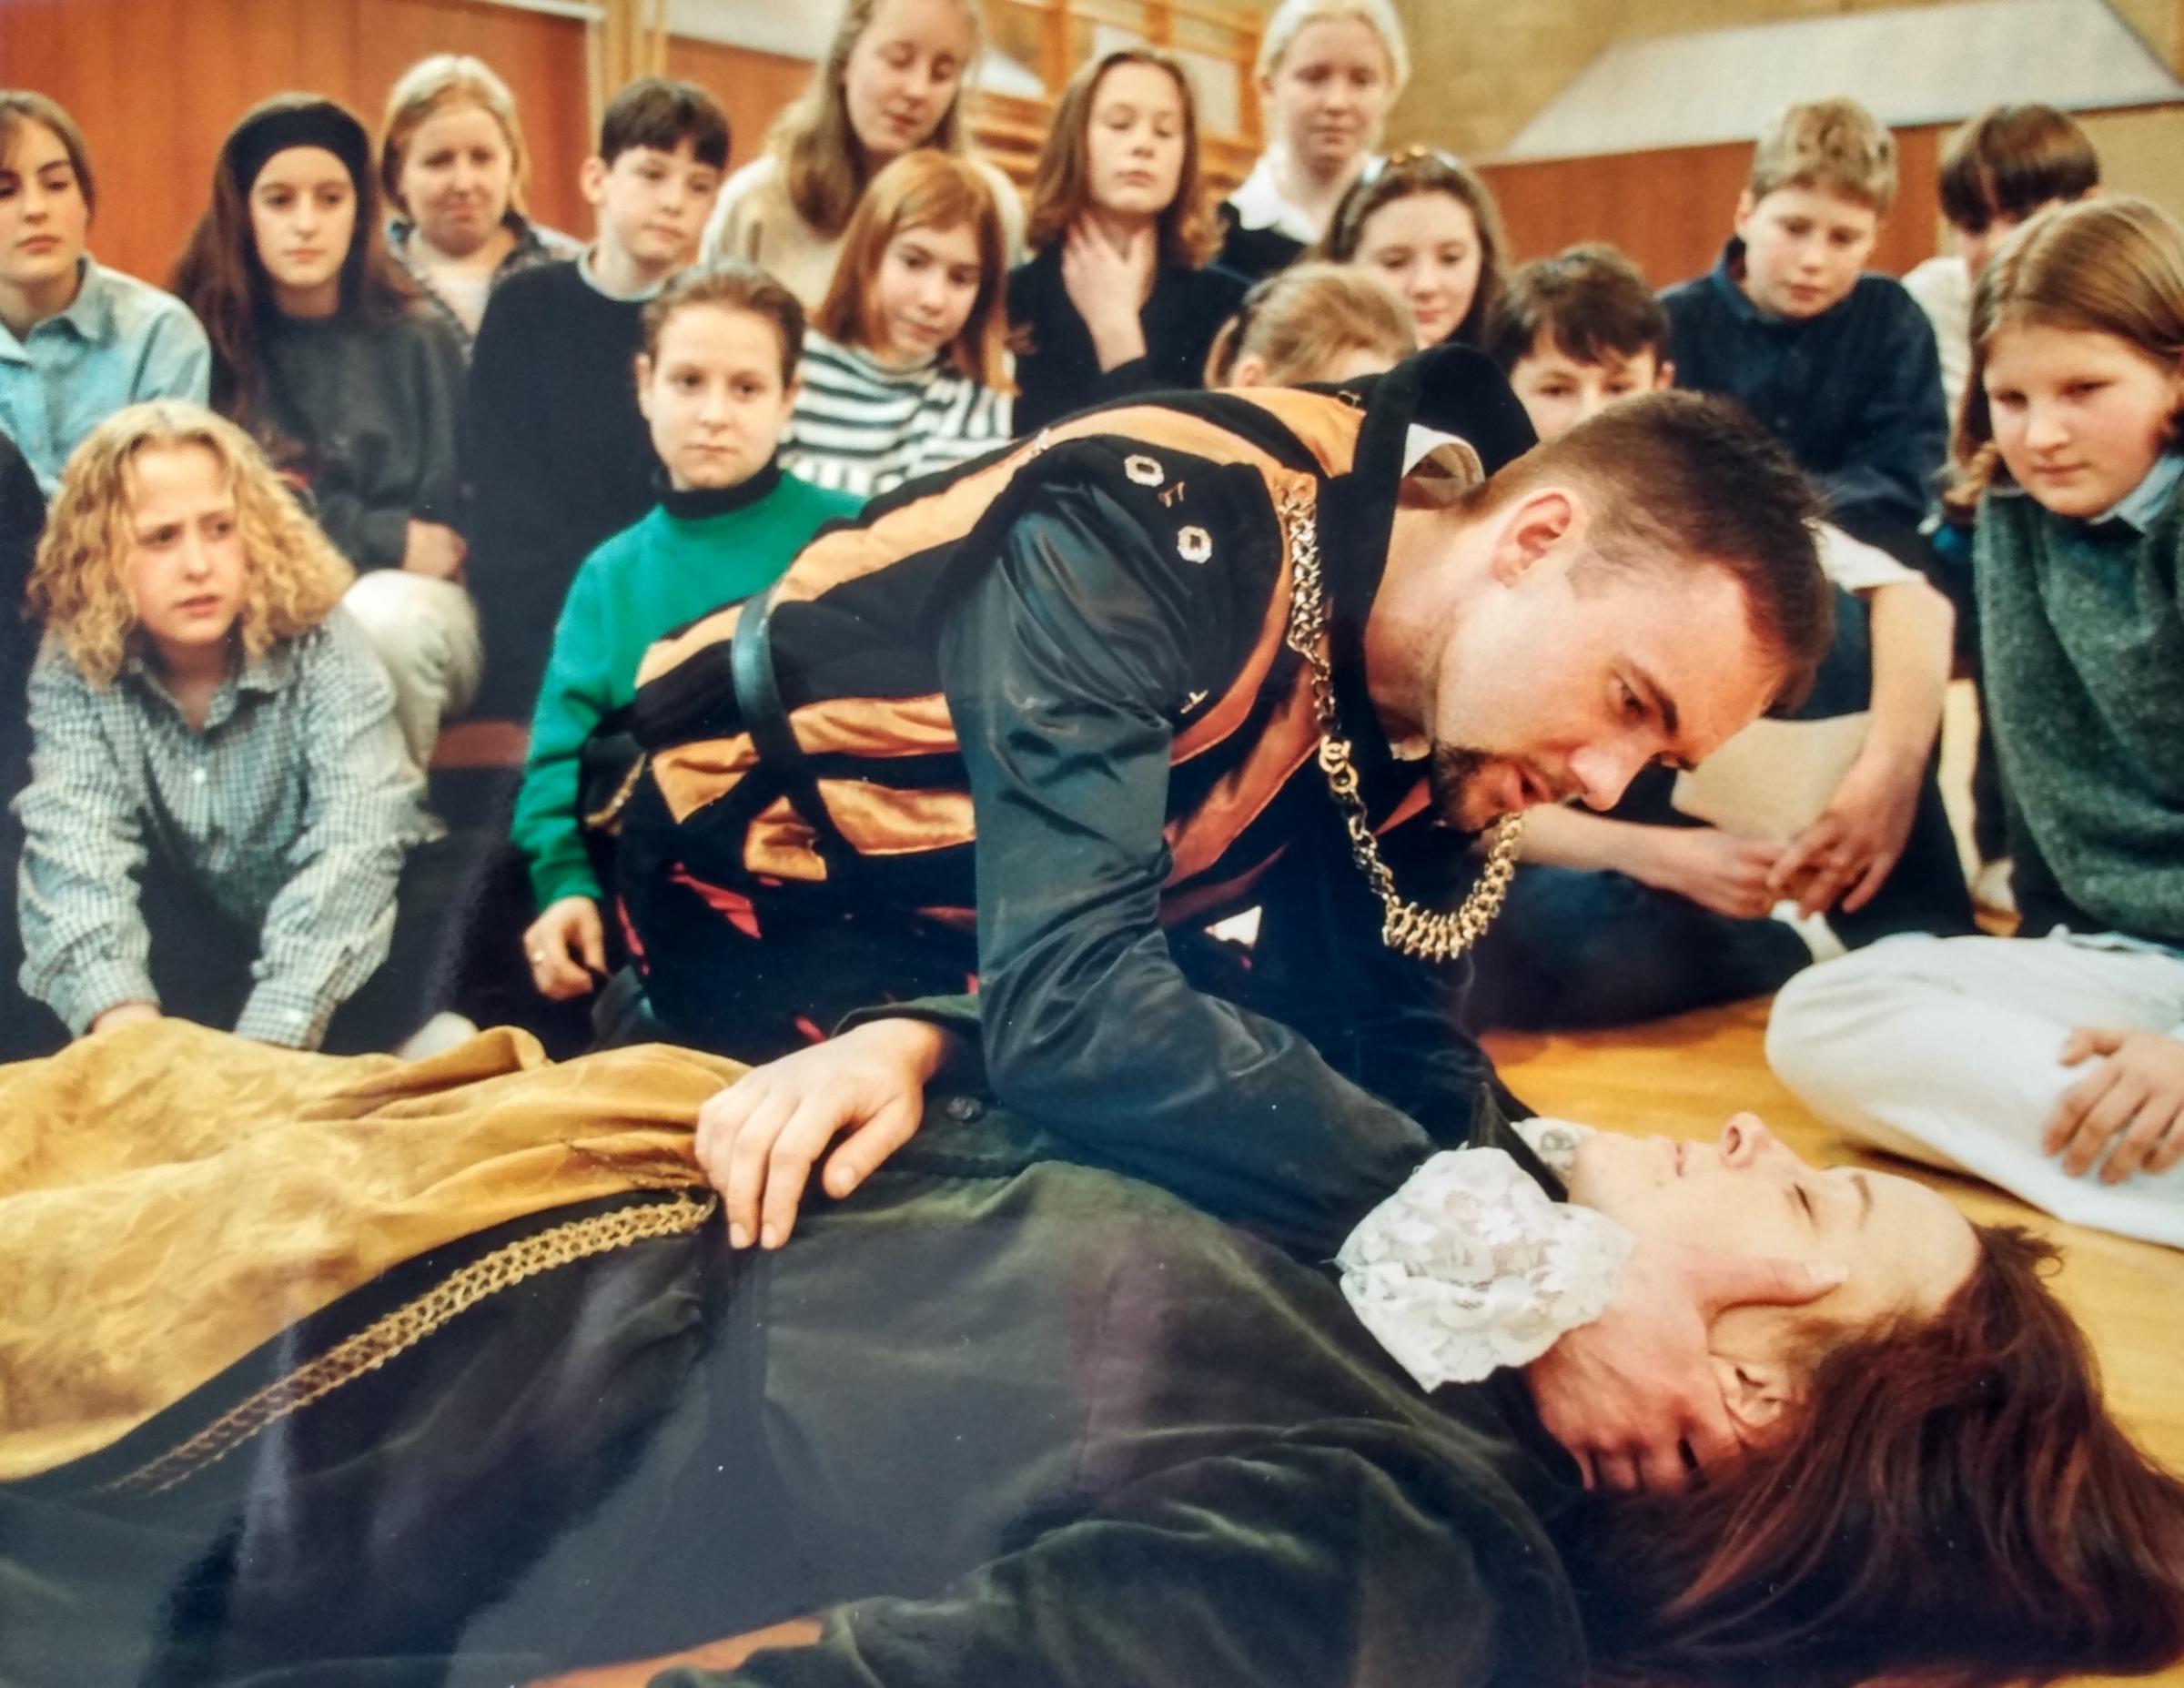 March 1996 saw students enjoy a workshop production of Romeo And Juliet performed by Pentabus Theatre